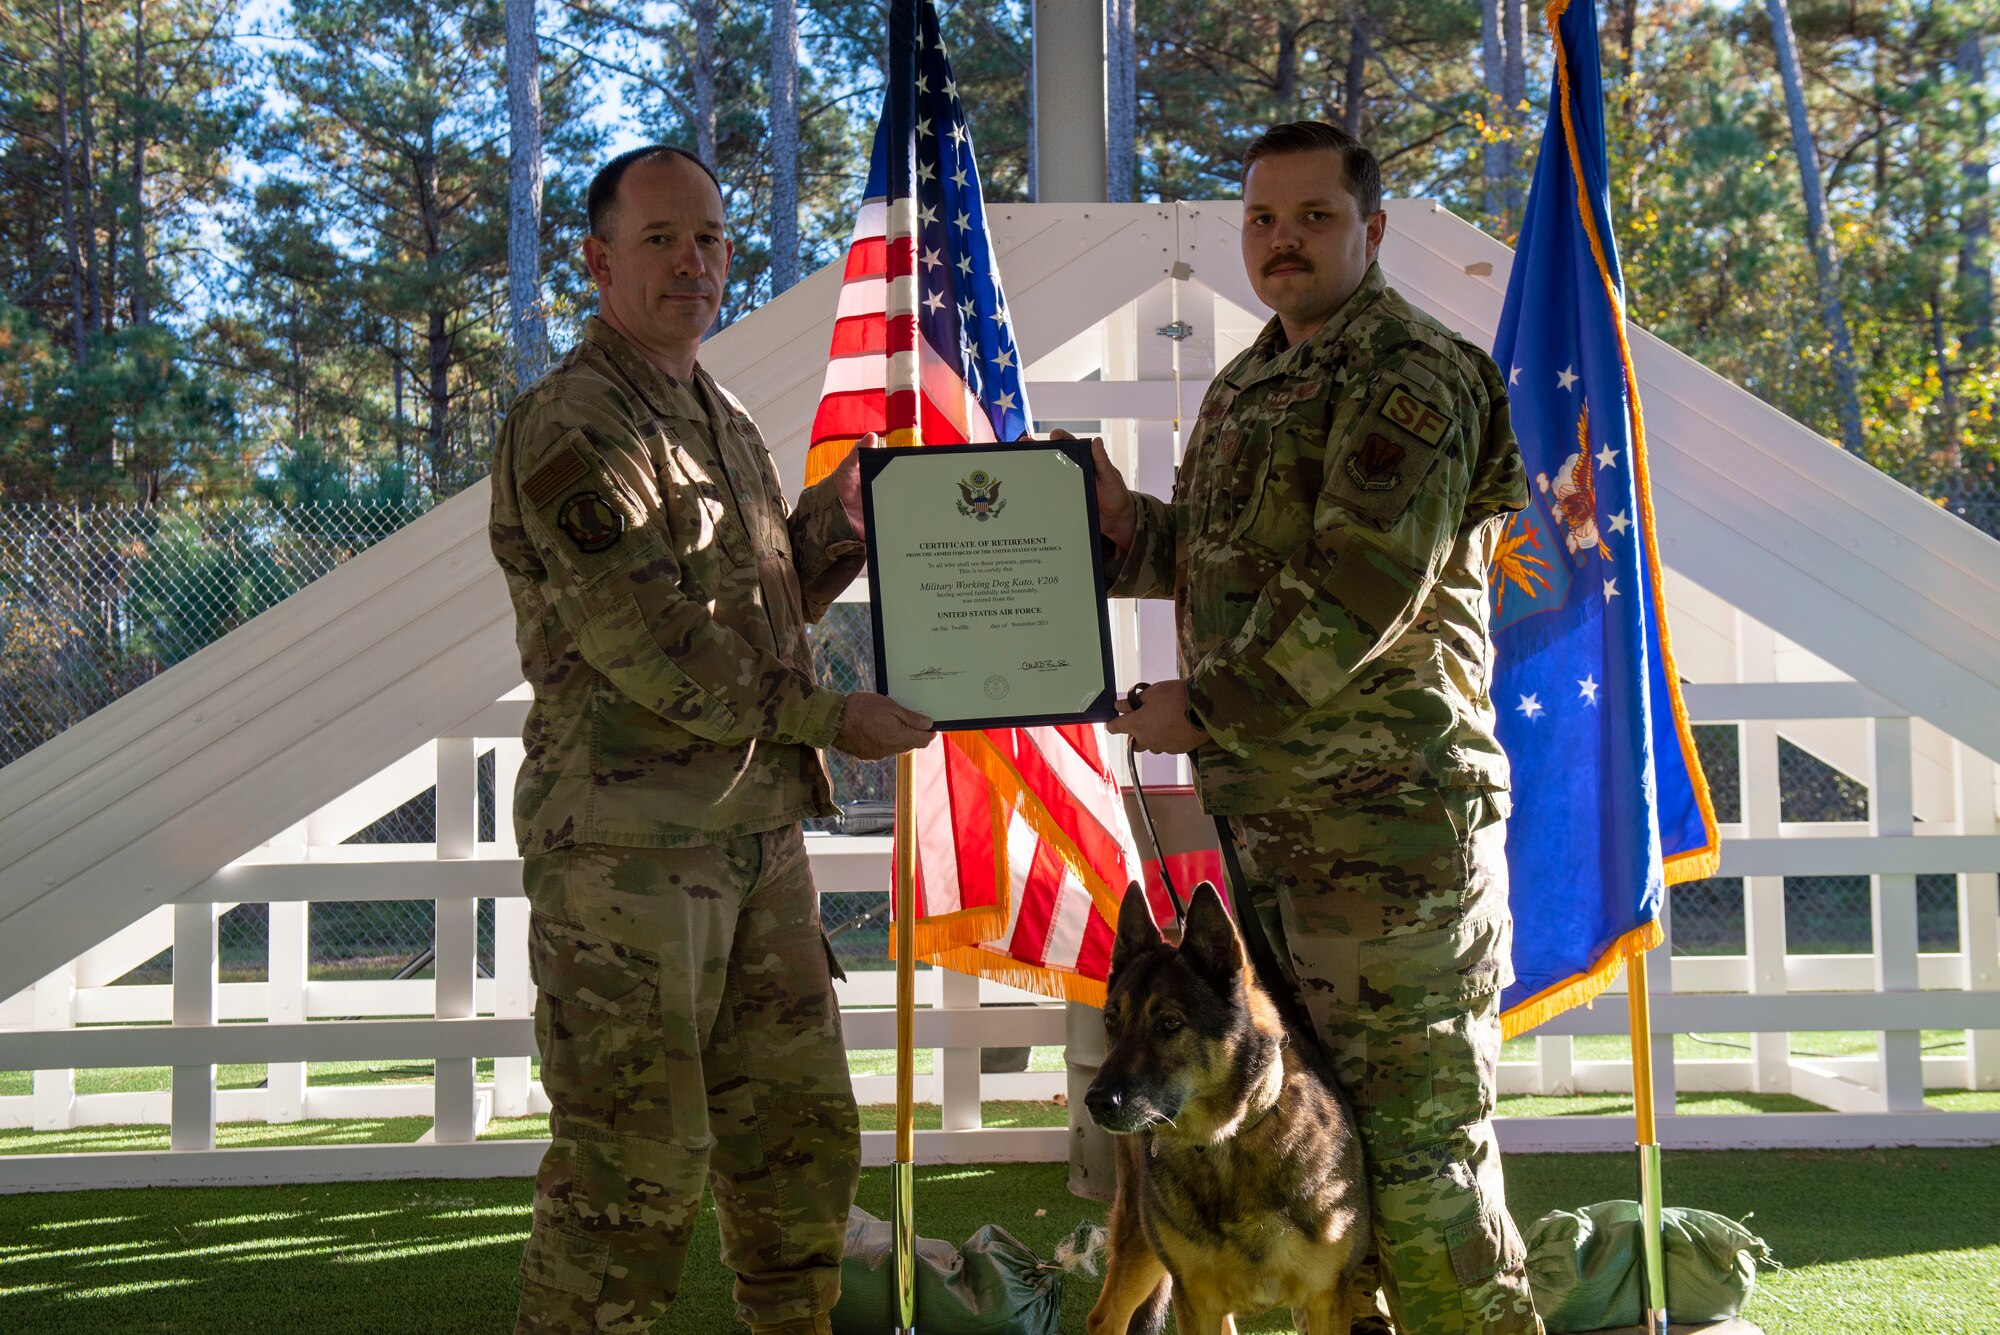 A MWD receives a certificate from leadership as part of a retirement ceremony.